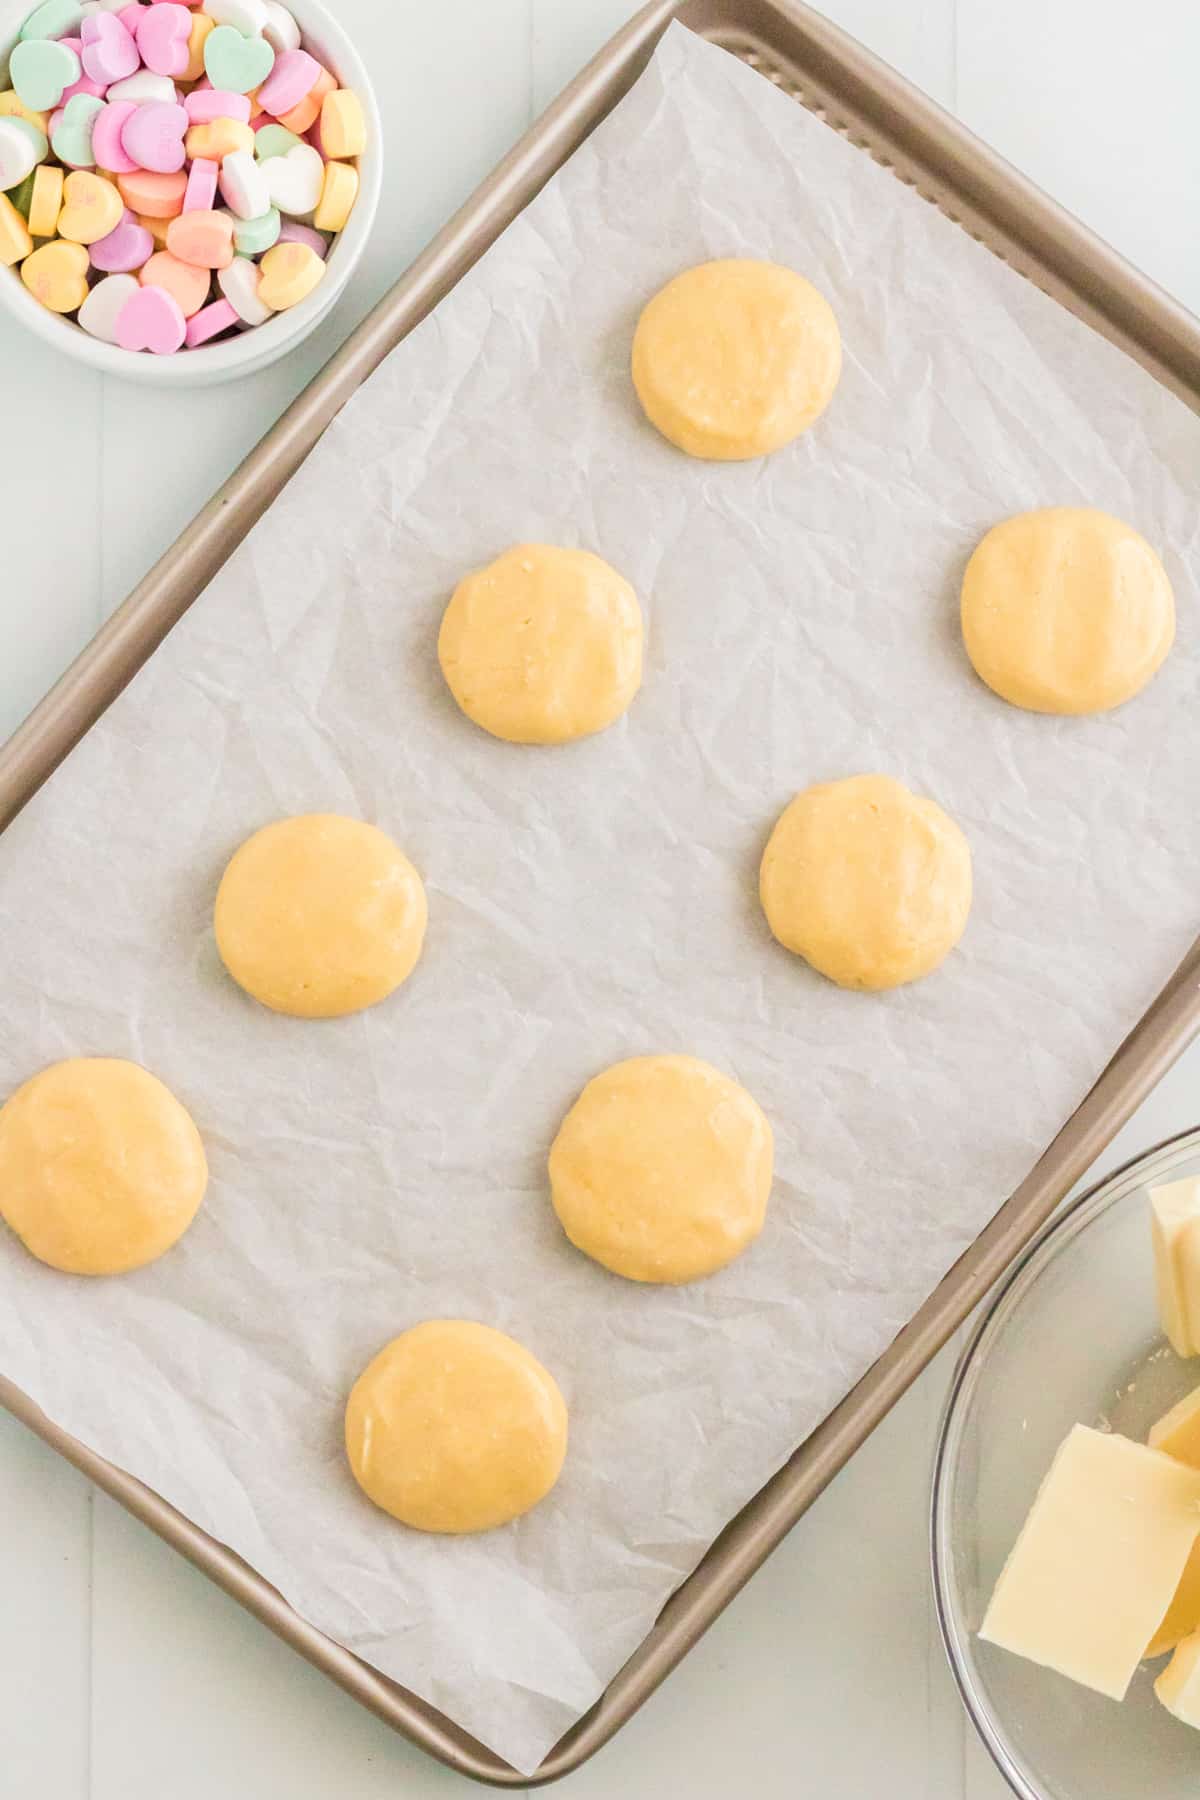 Vanilla cake mix cookie batter on parchment lined baking sheet